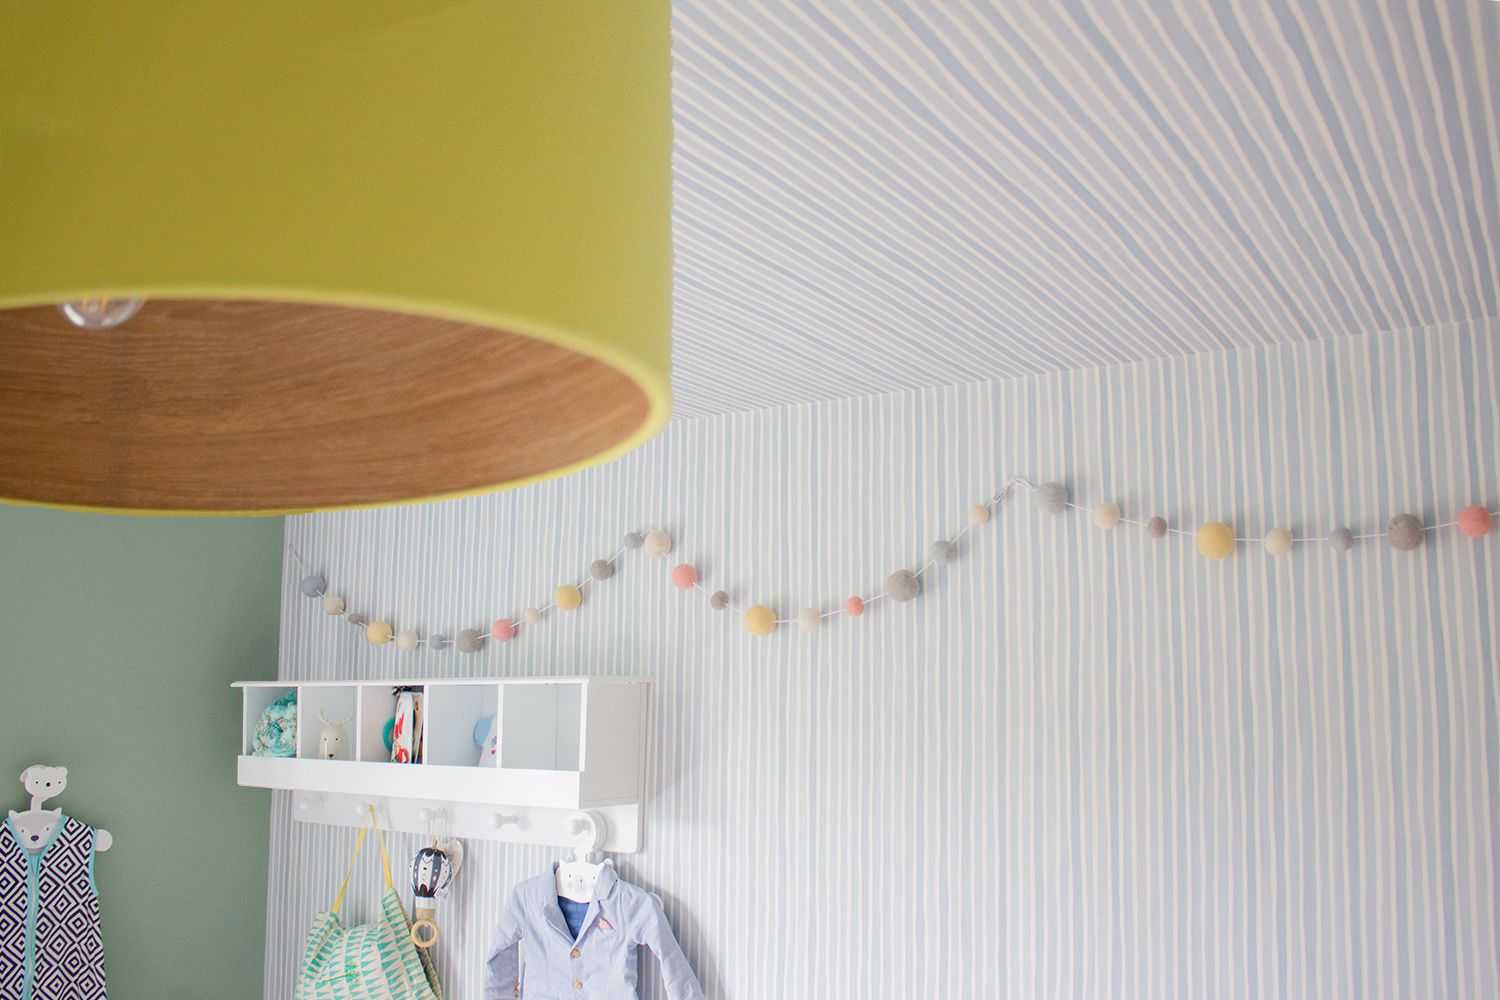 A close up of the green lightshade, with the striped wallpaper on the ceiling and wall in the background.